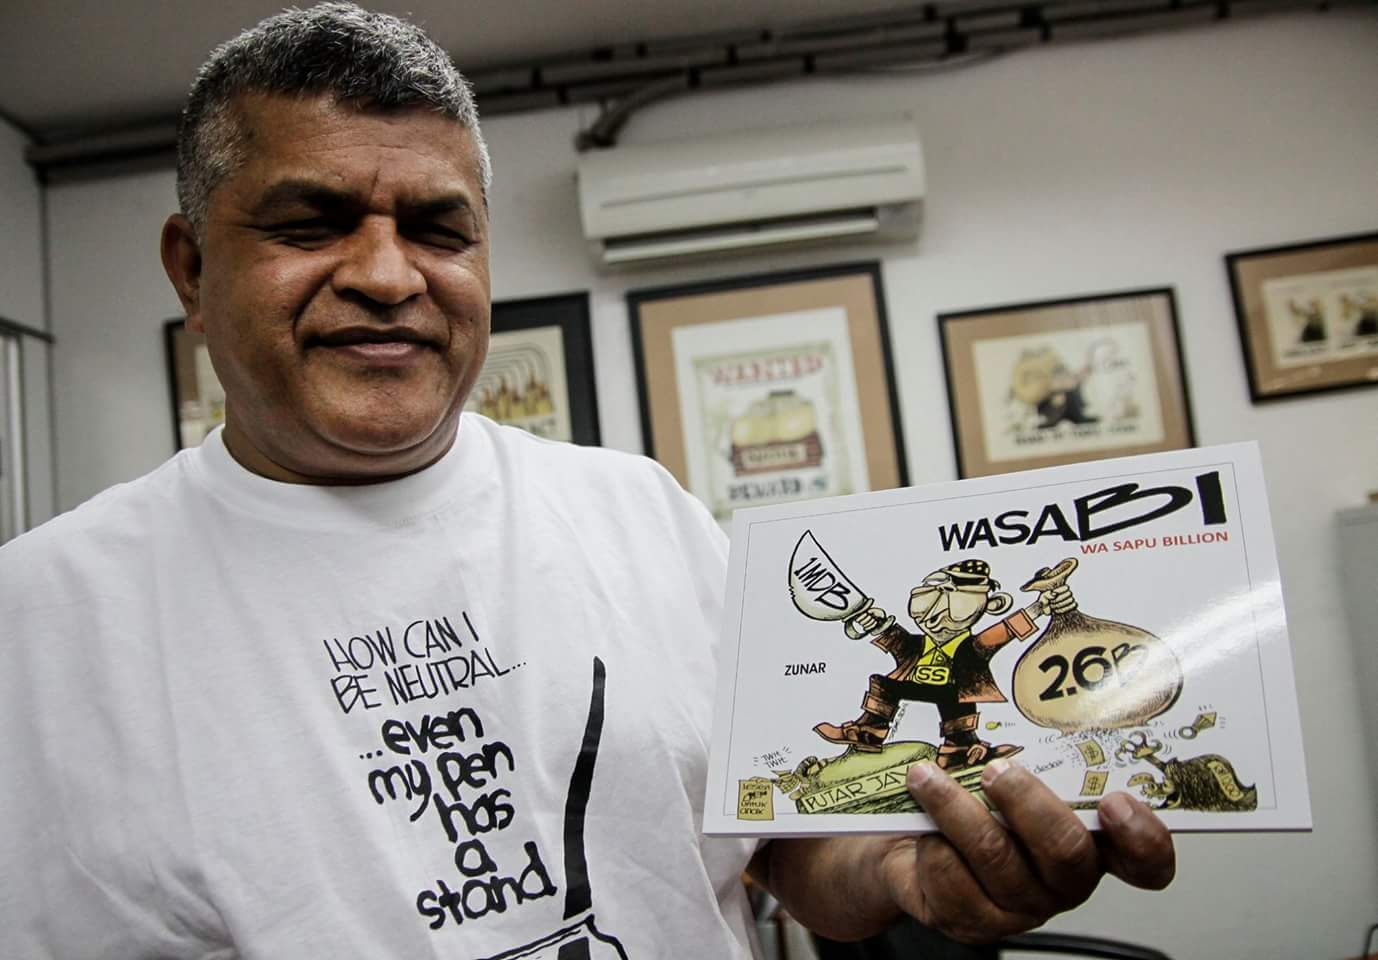 Zunar is facing a 43-year jail sentence after being charged nine times for sedition for tweets and caricatures critical of the Najib government. [Image credit: Zunar]